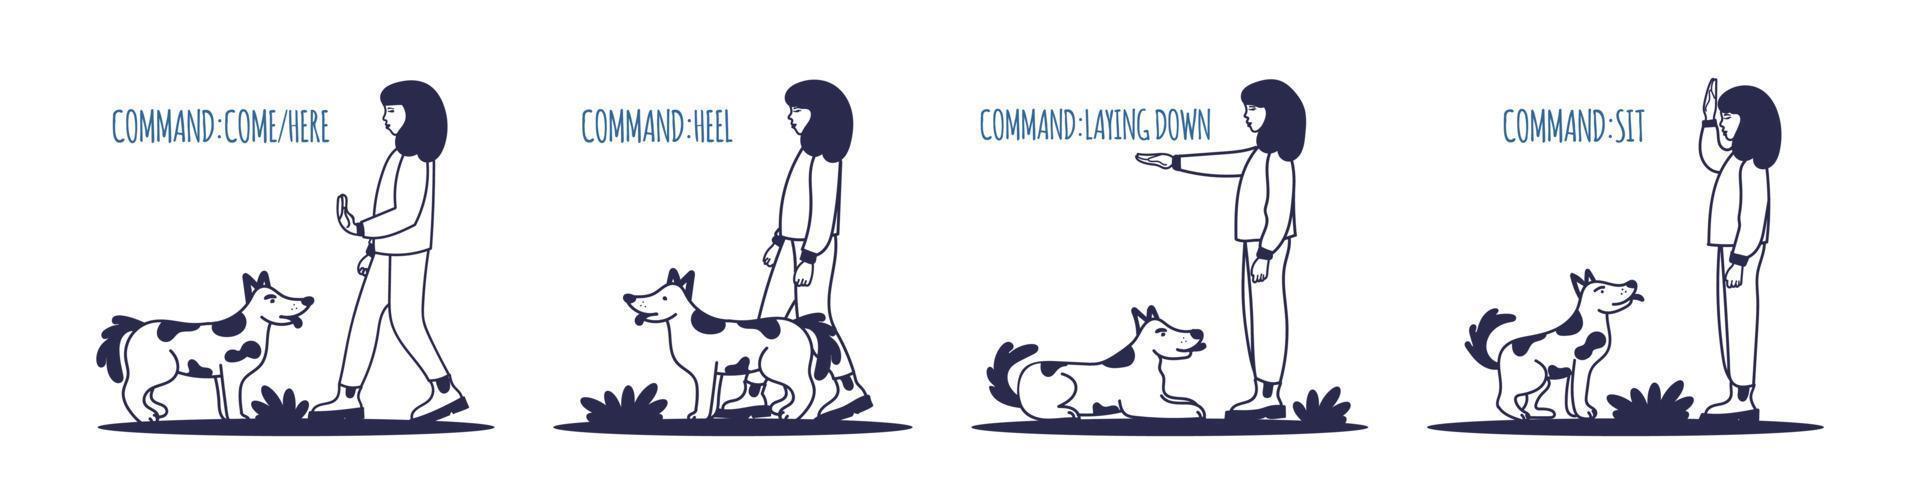 People training their pet dog set. The pet executes the command to lie down. The training process. Editable vector illustration  A simple icon, symbol, sign. Editable vector illustration isolated